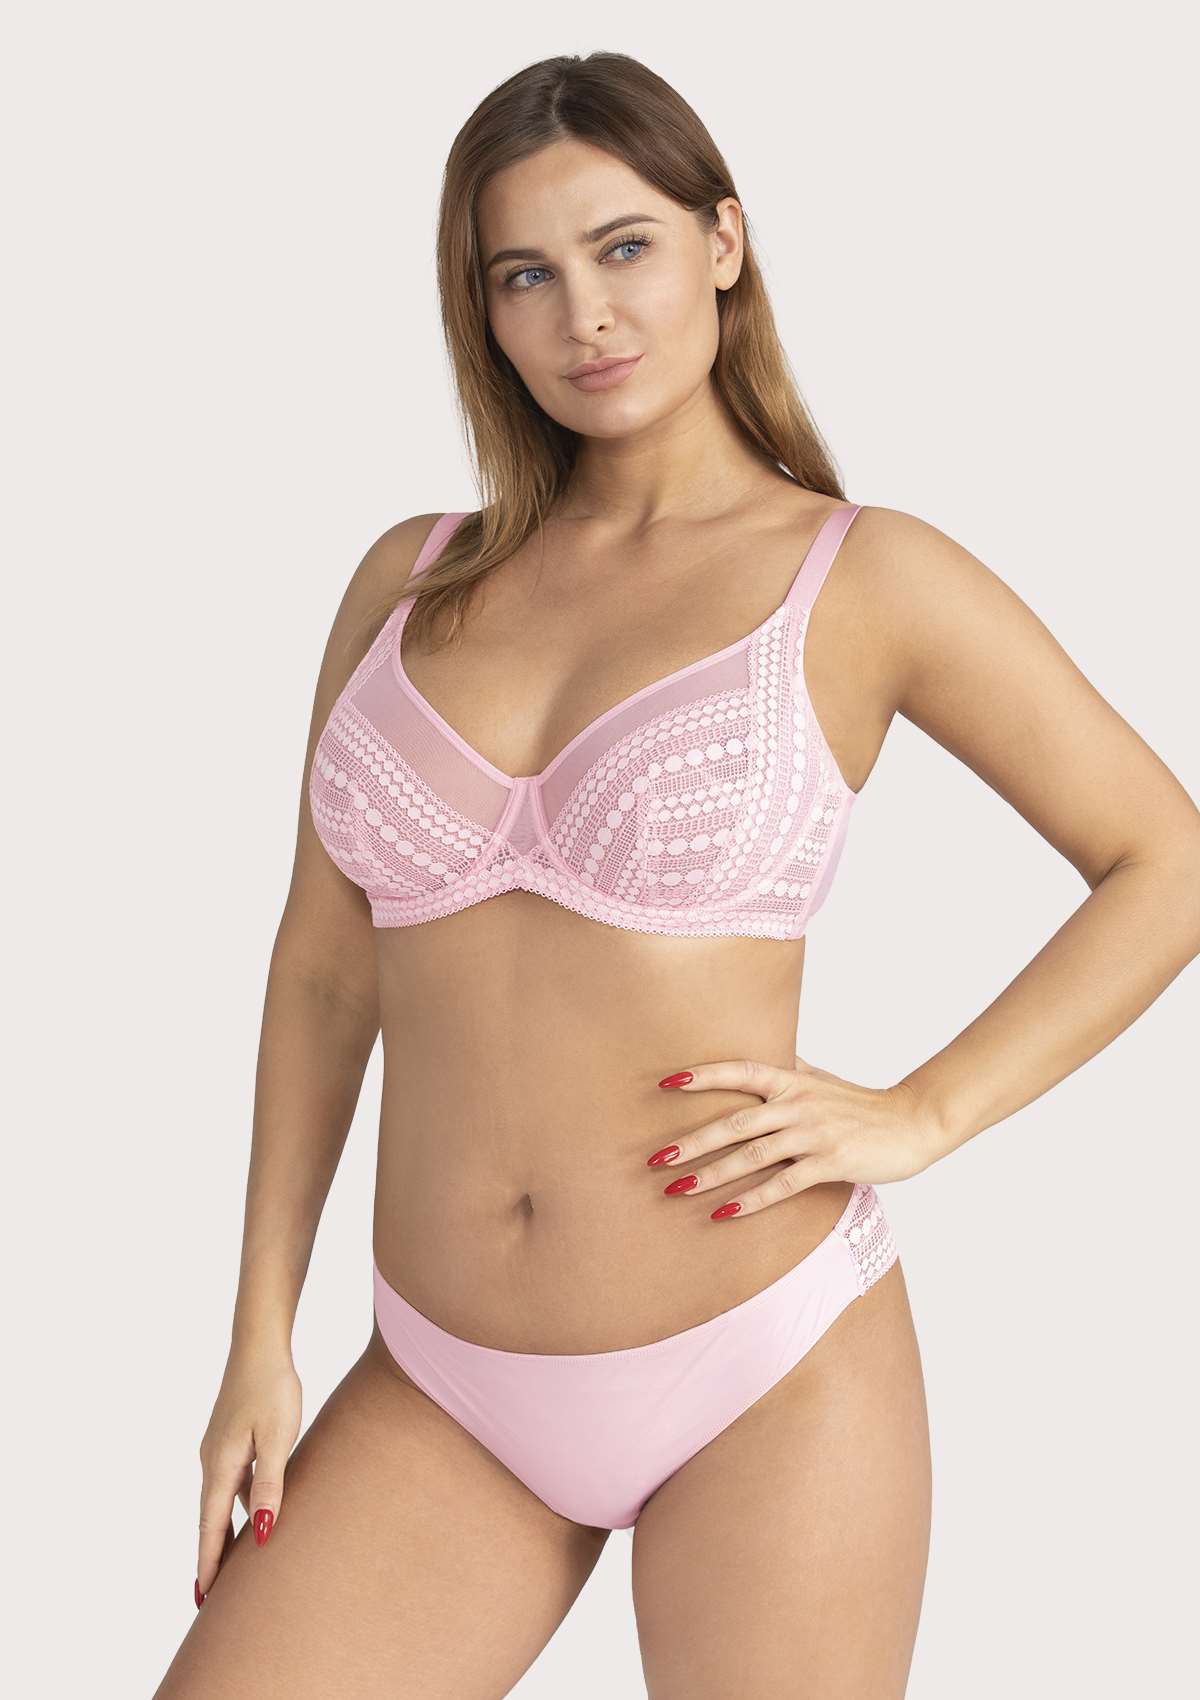 HSIA Heroine Lace Bra And Panties Set: Most Comfortable Supportive Bra - Pink / 38 / DD/E